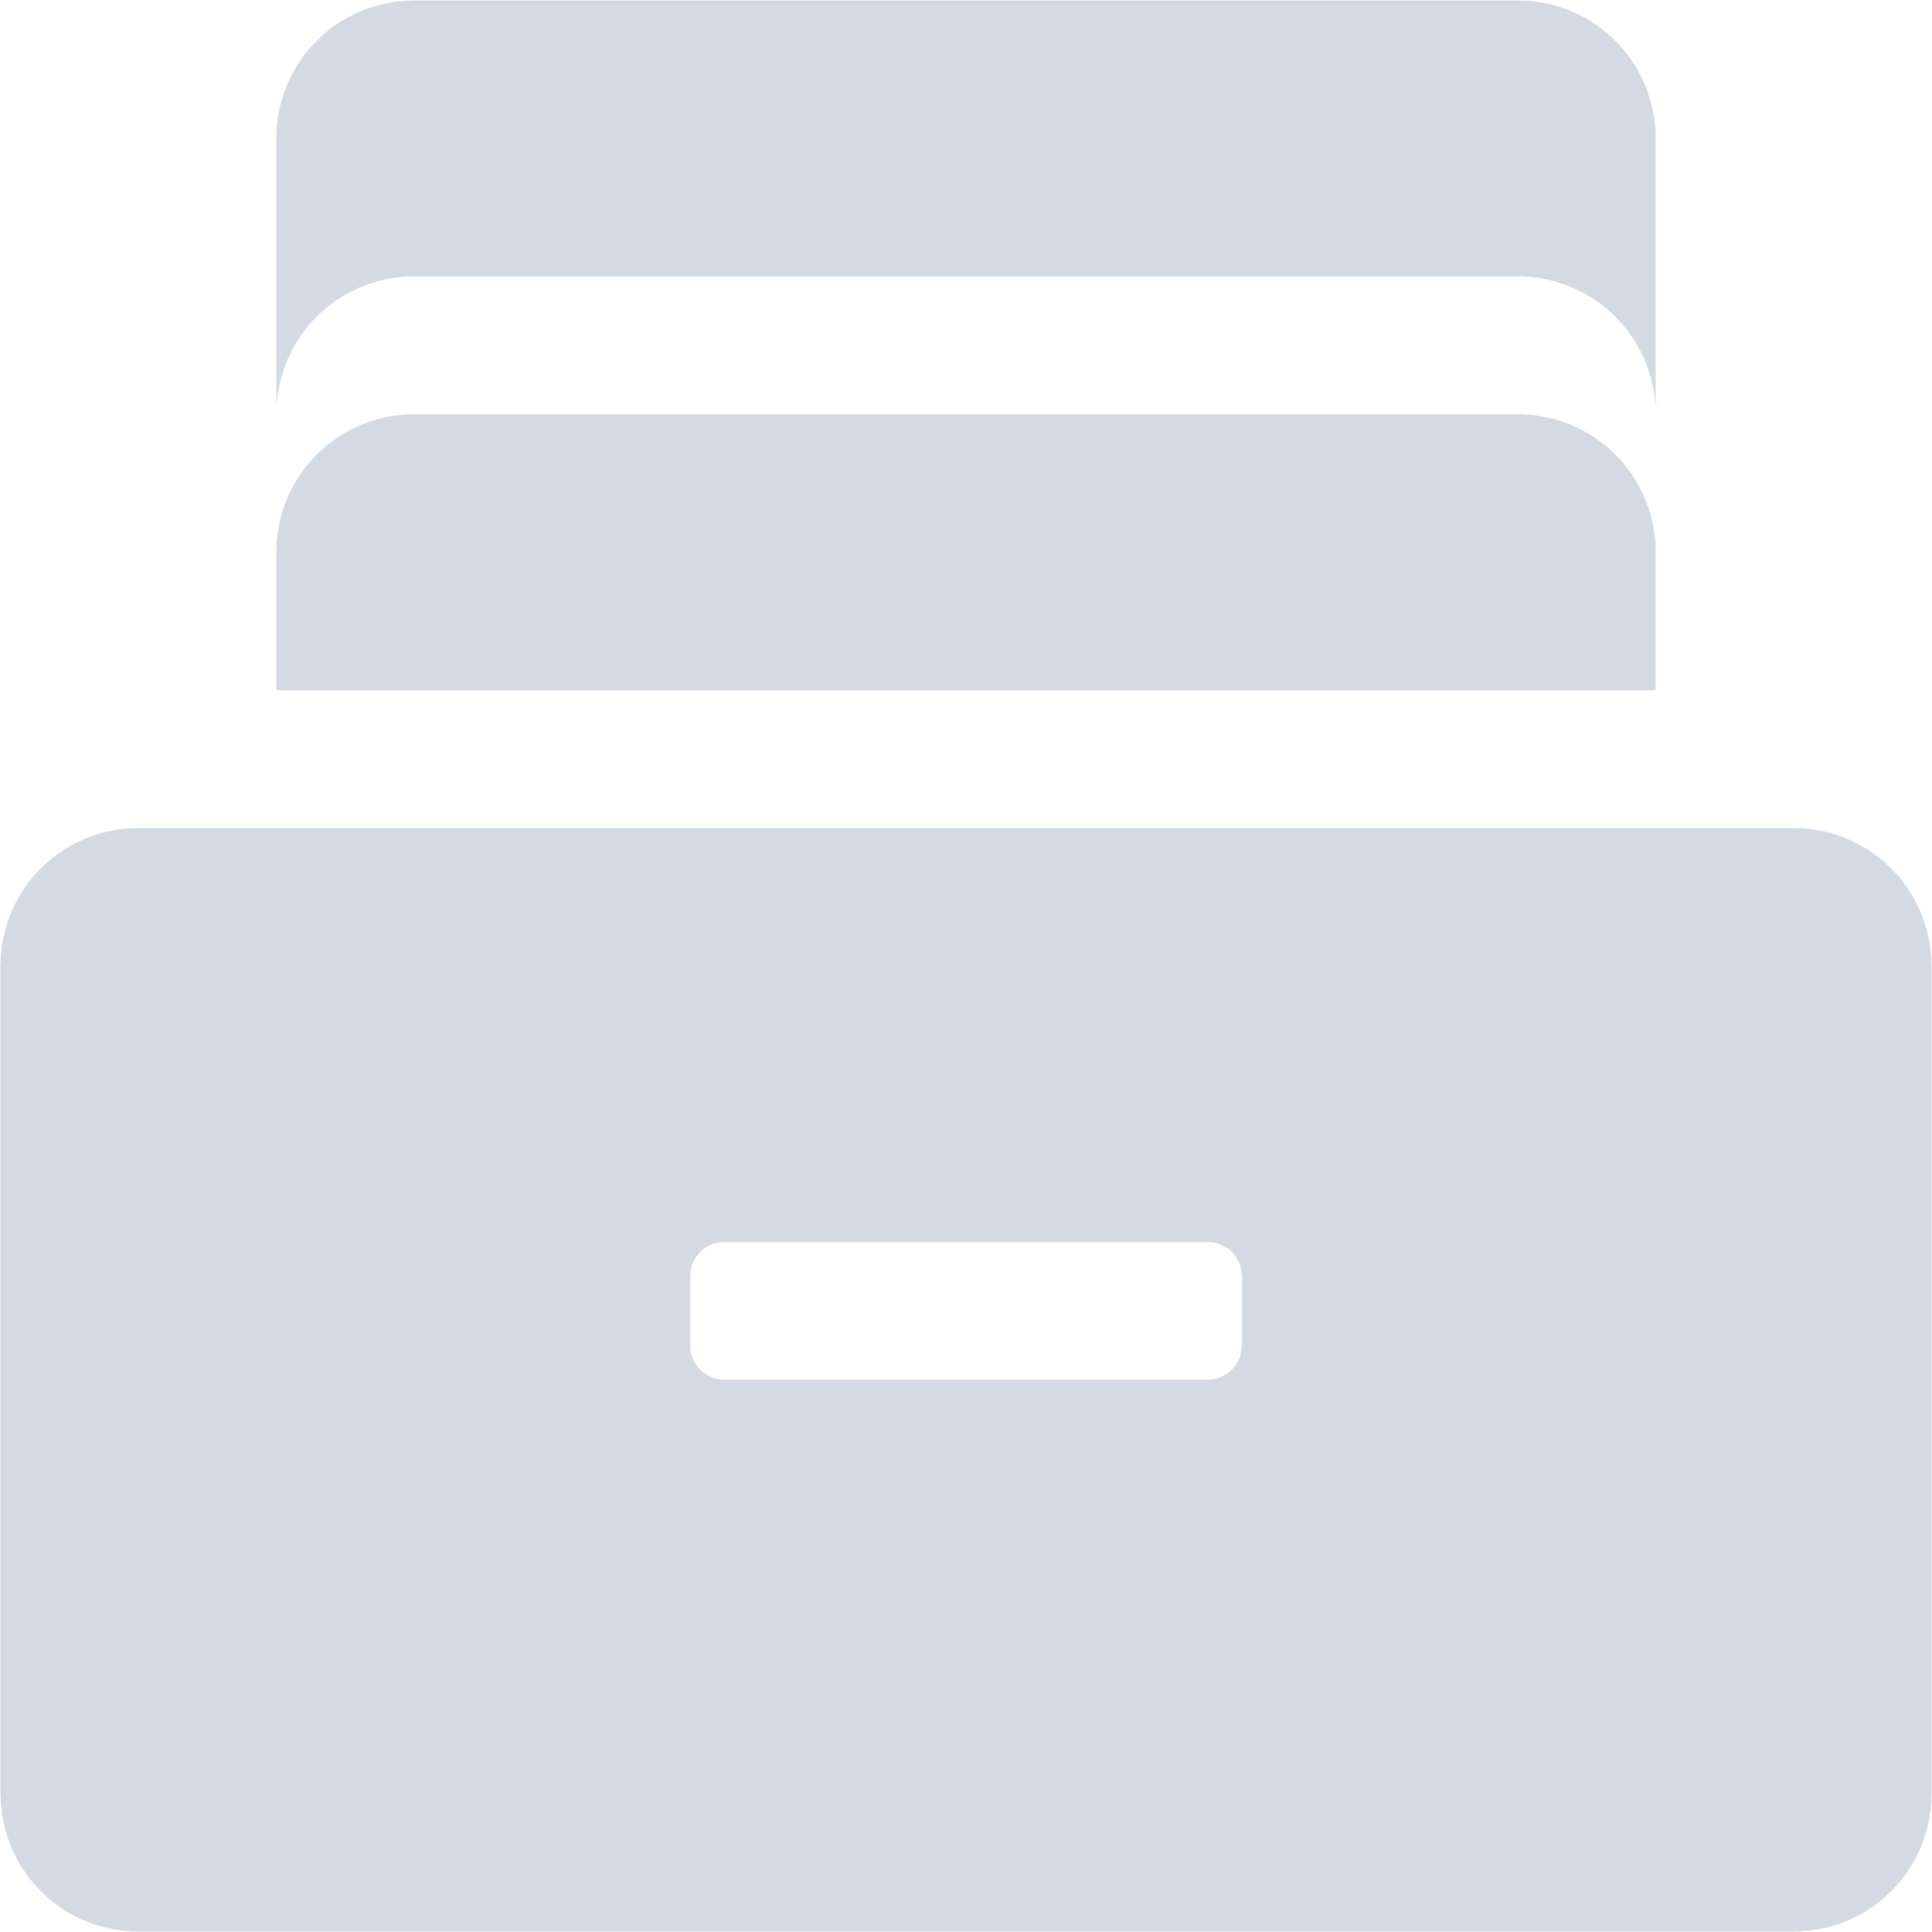 system file manager panel icon